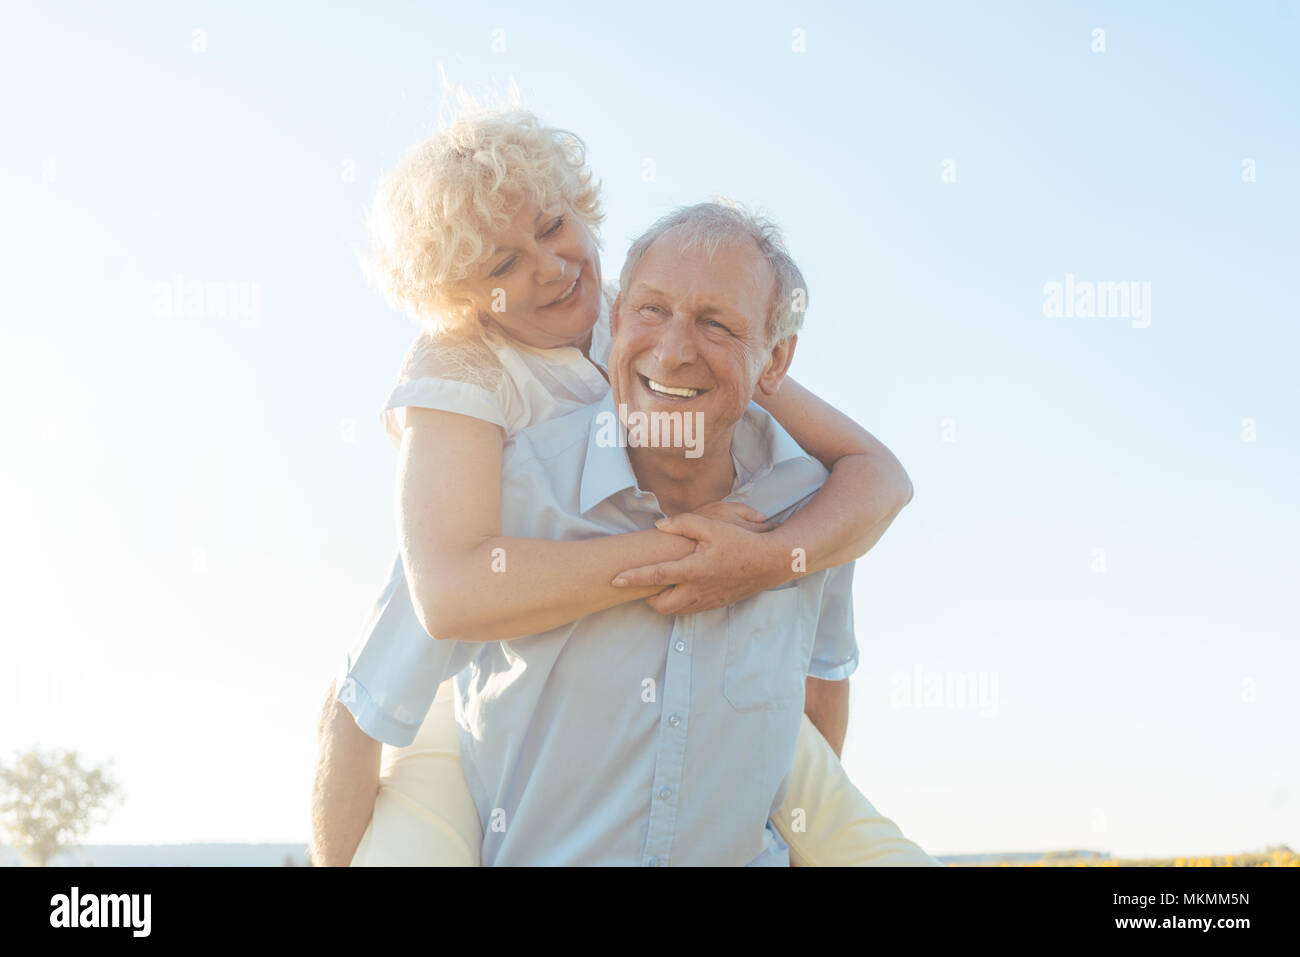 Happy senior man laughing while carrying his partner on his back Stock Photo